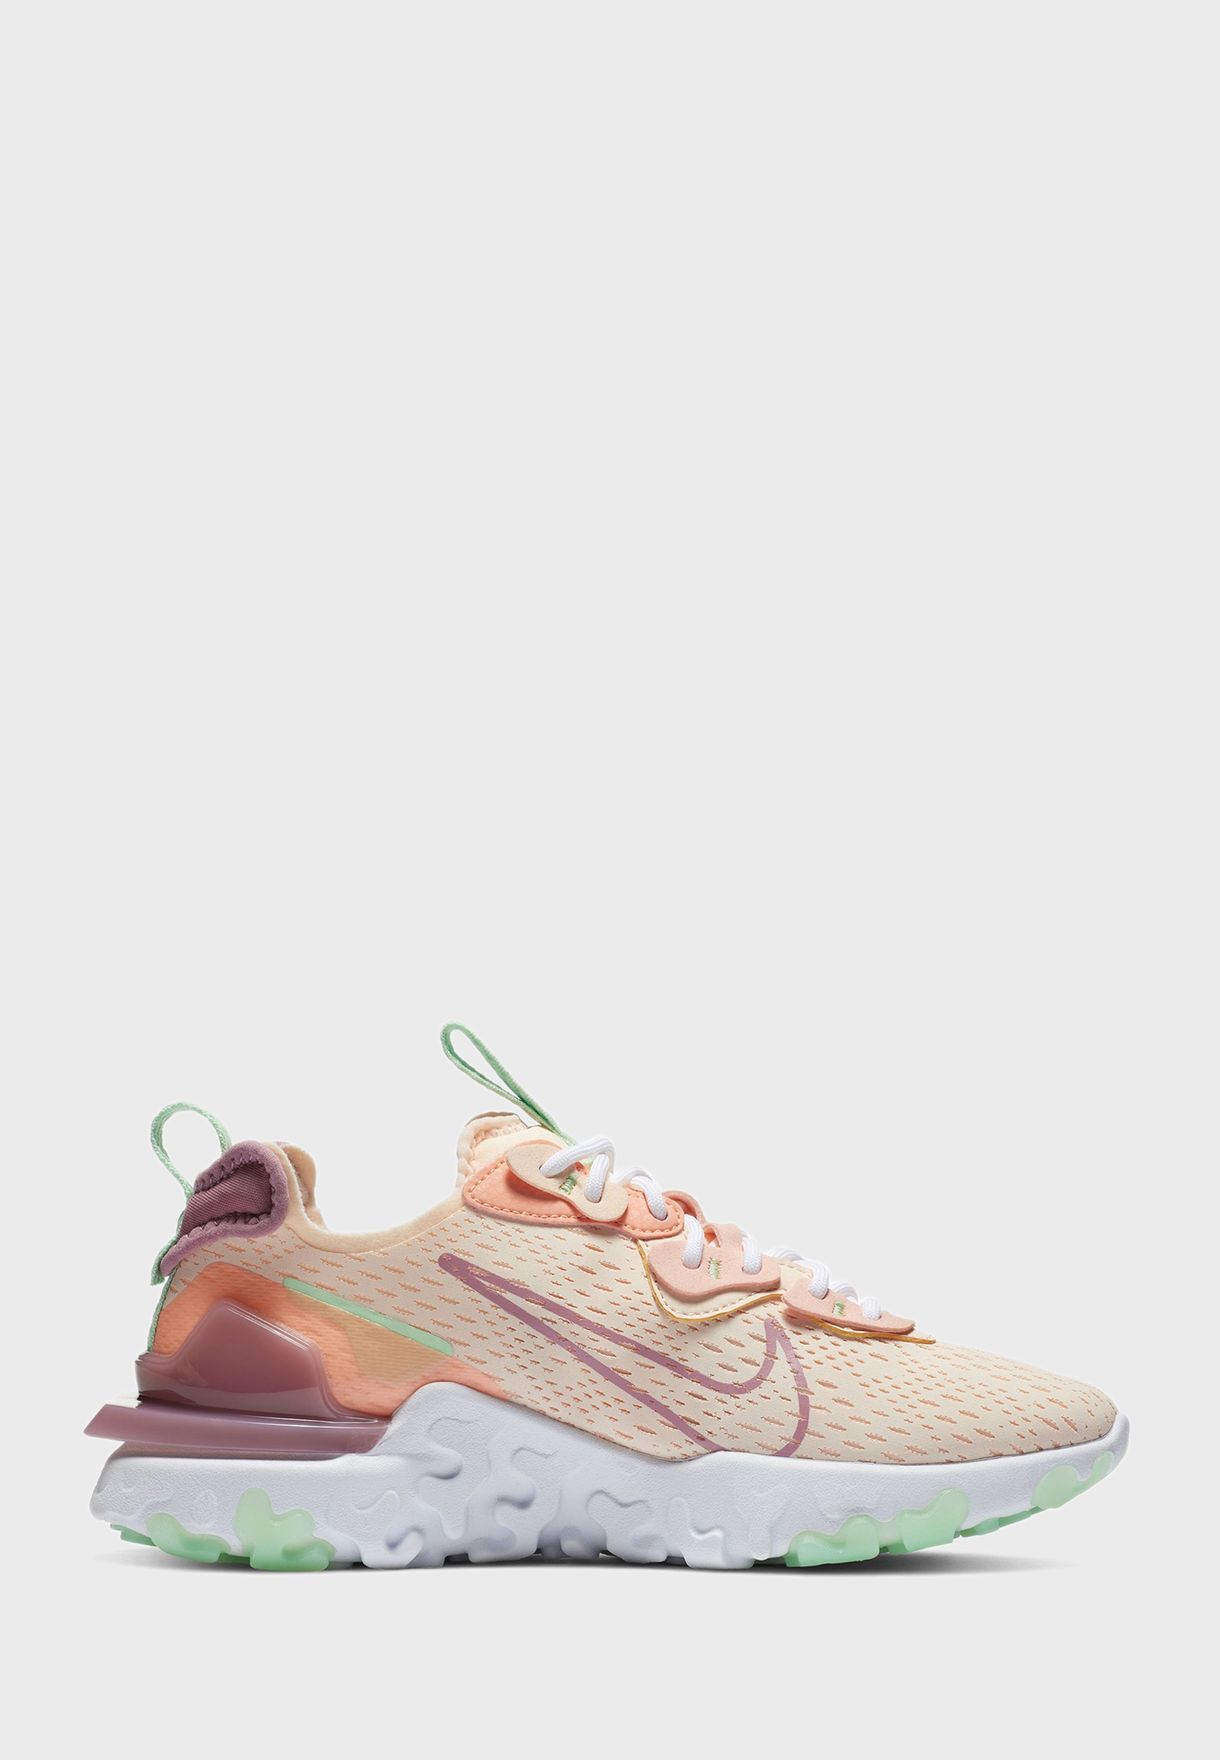 nsw react vision sneakers